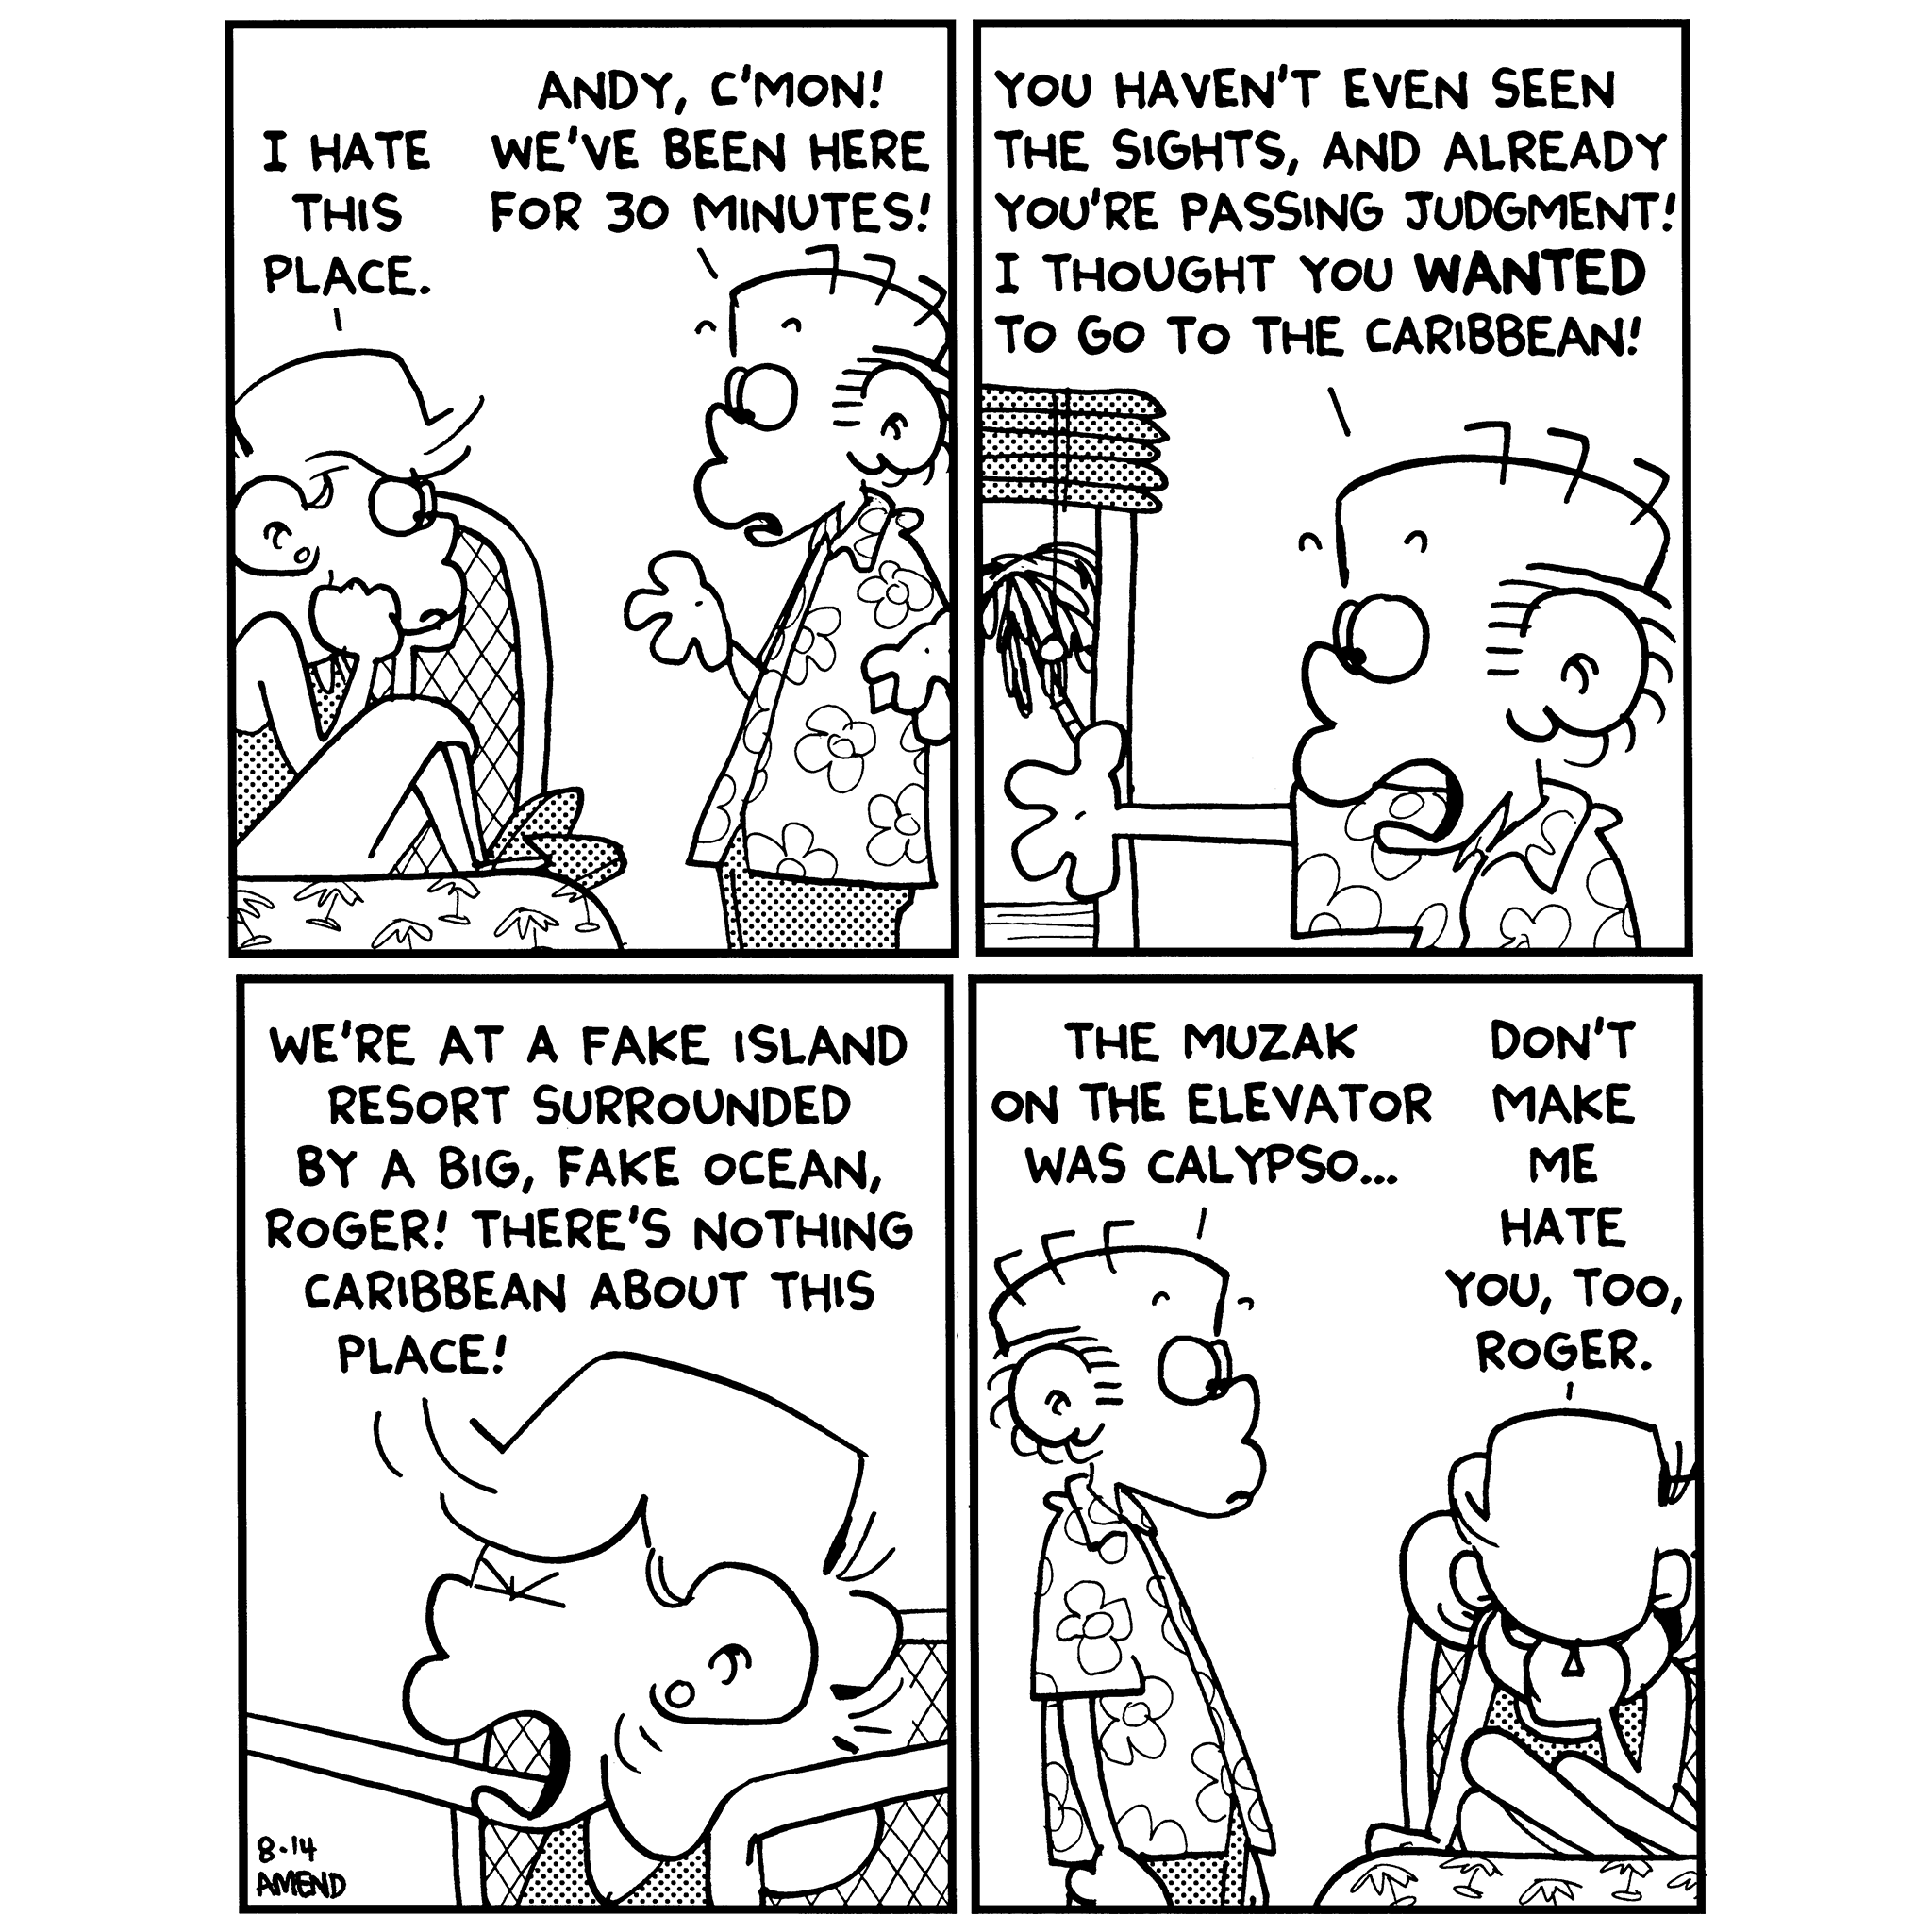 FoxTrot comic strip by Bill Amend - August 15, 2001 - Caribbeanny Vacation